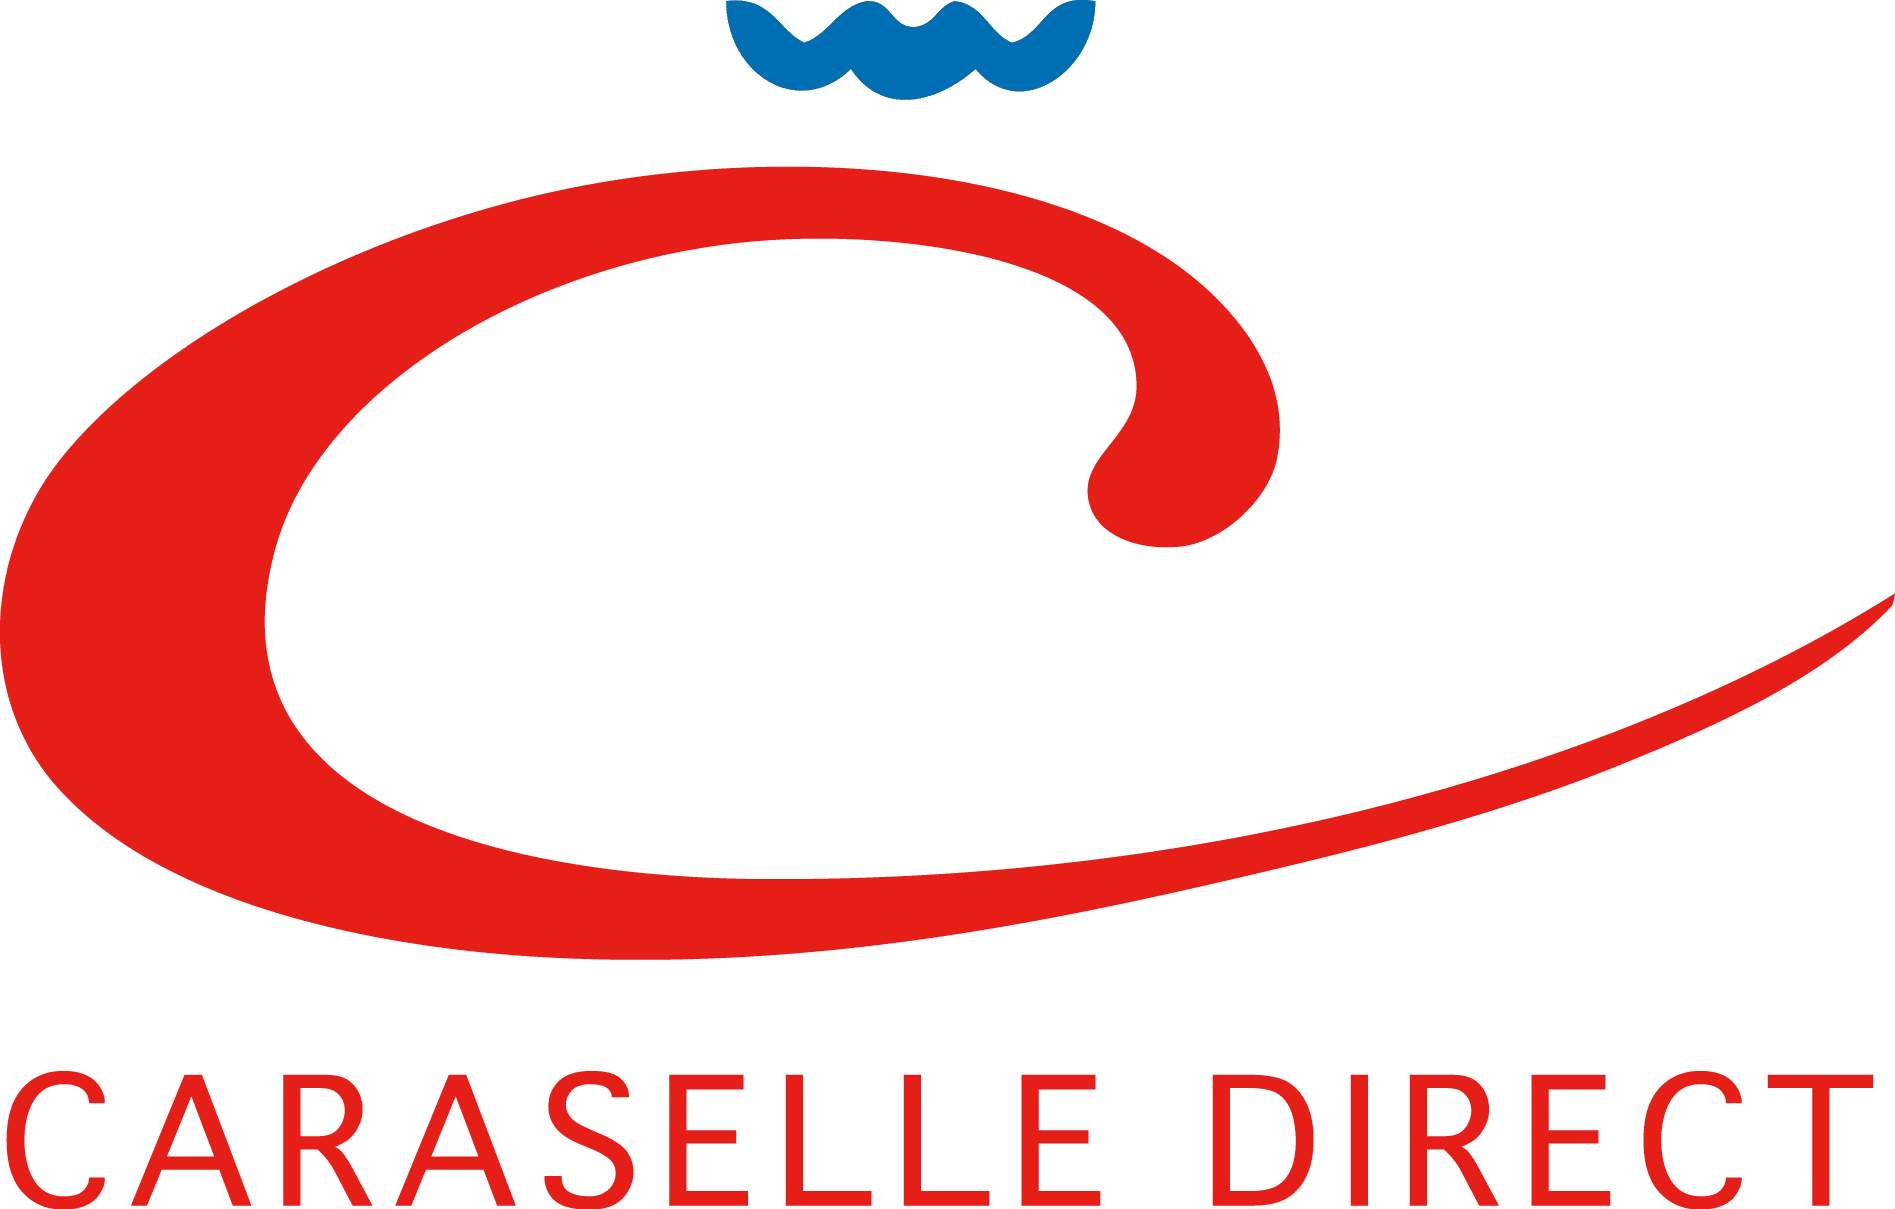 Caraselle direct